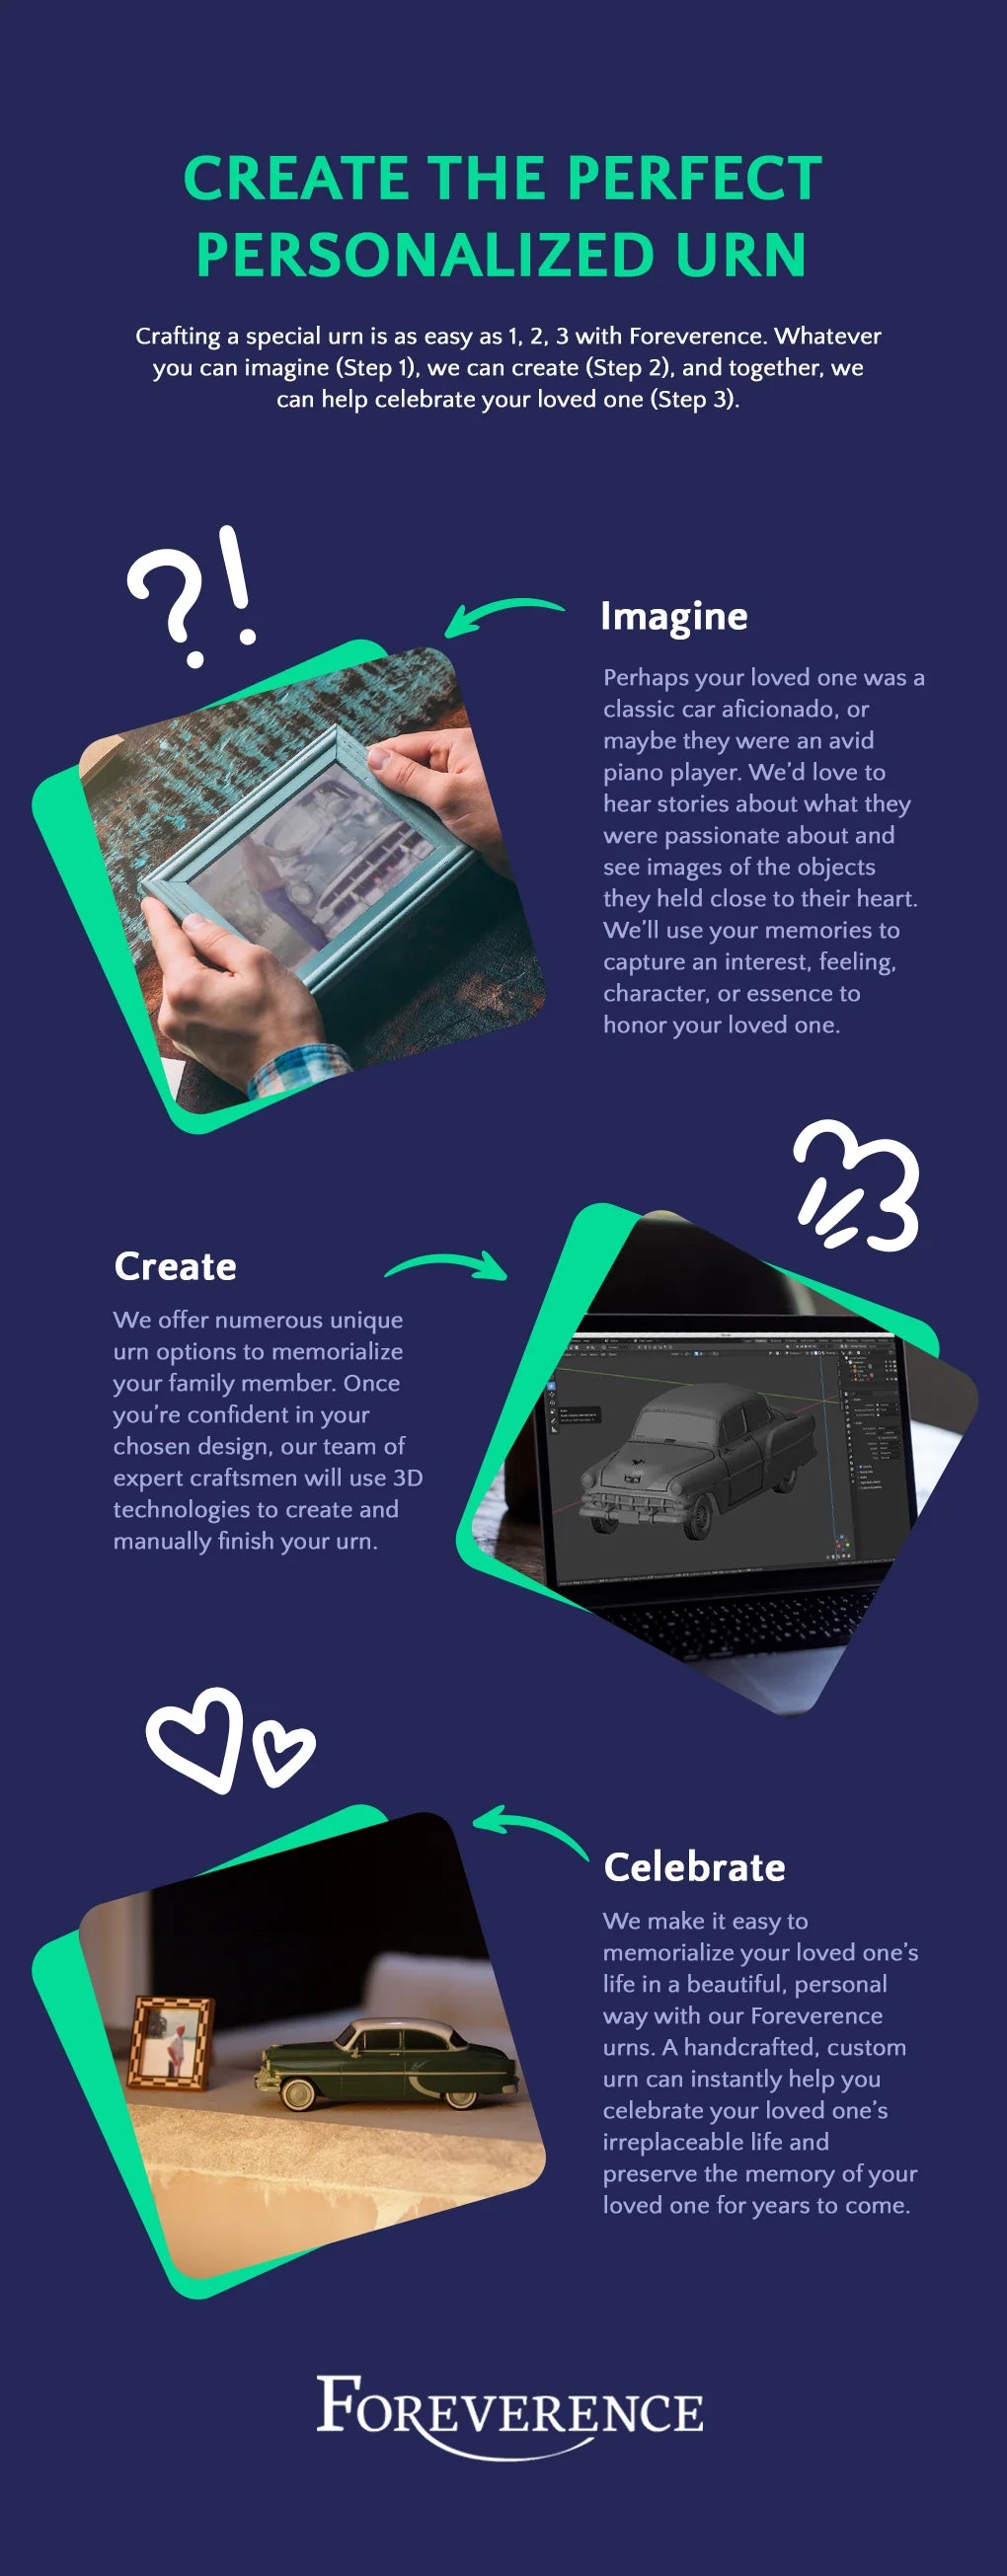 an infographic on the personalized urn creation process